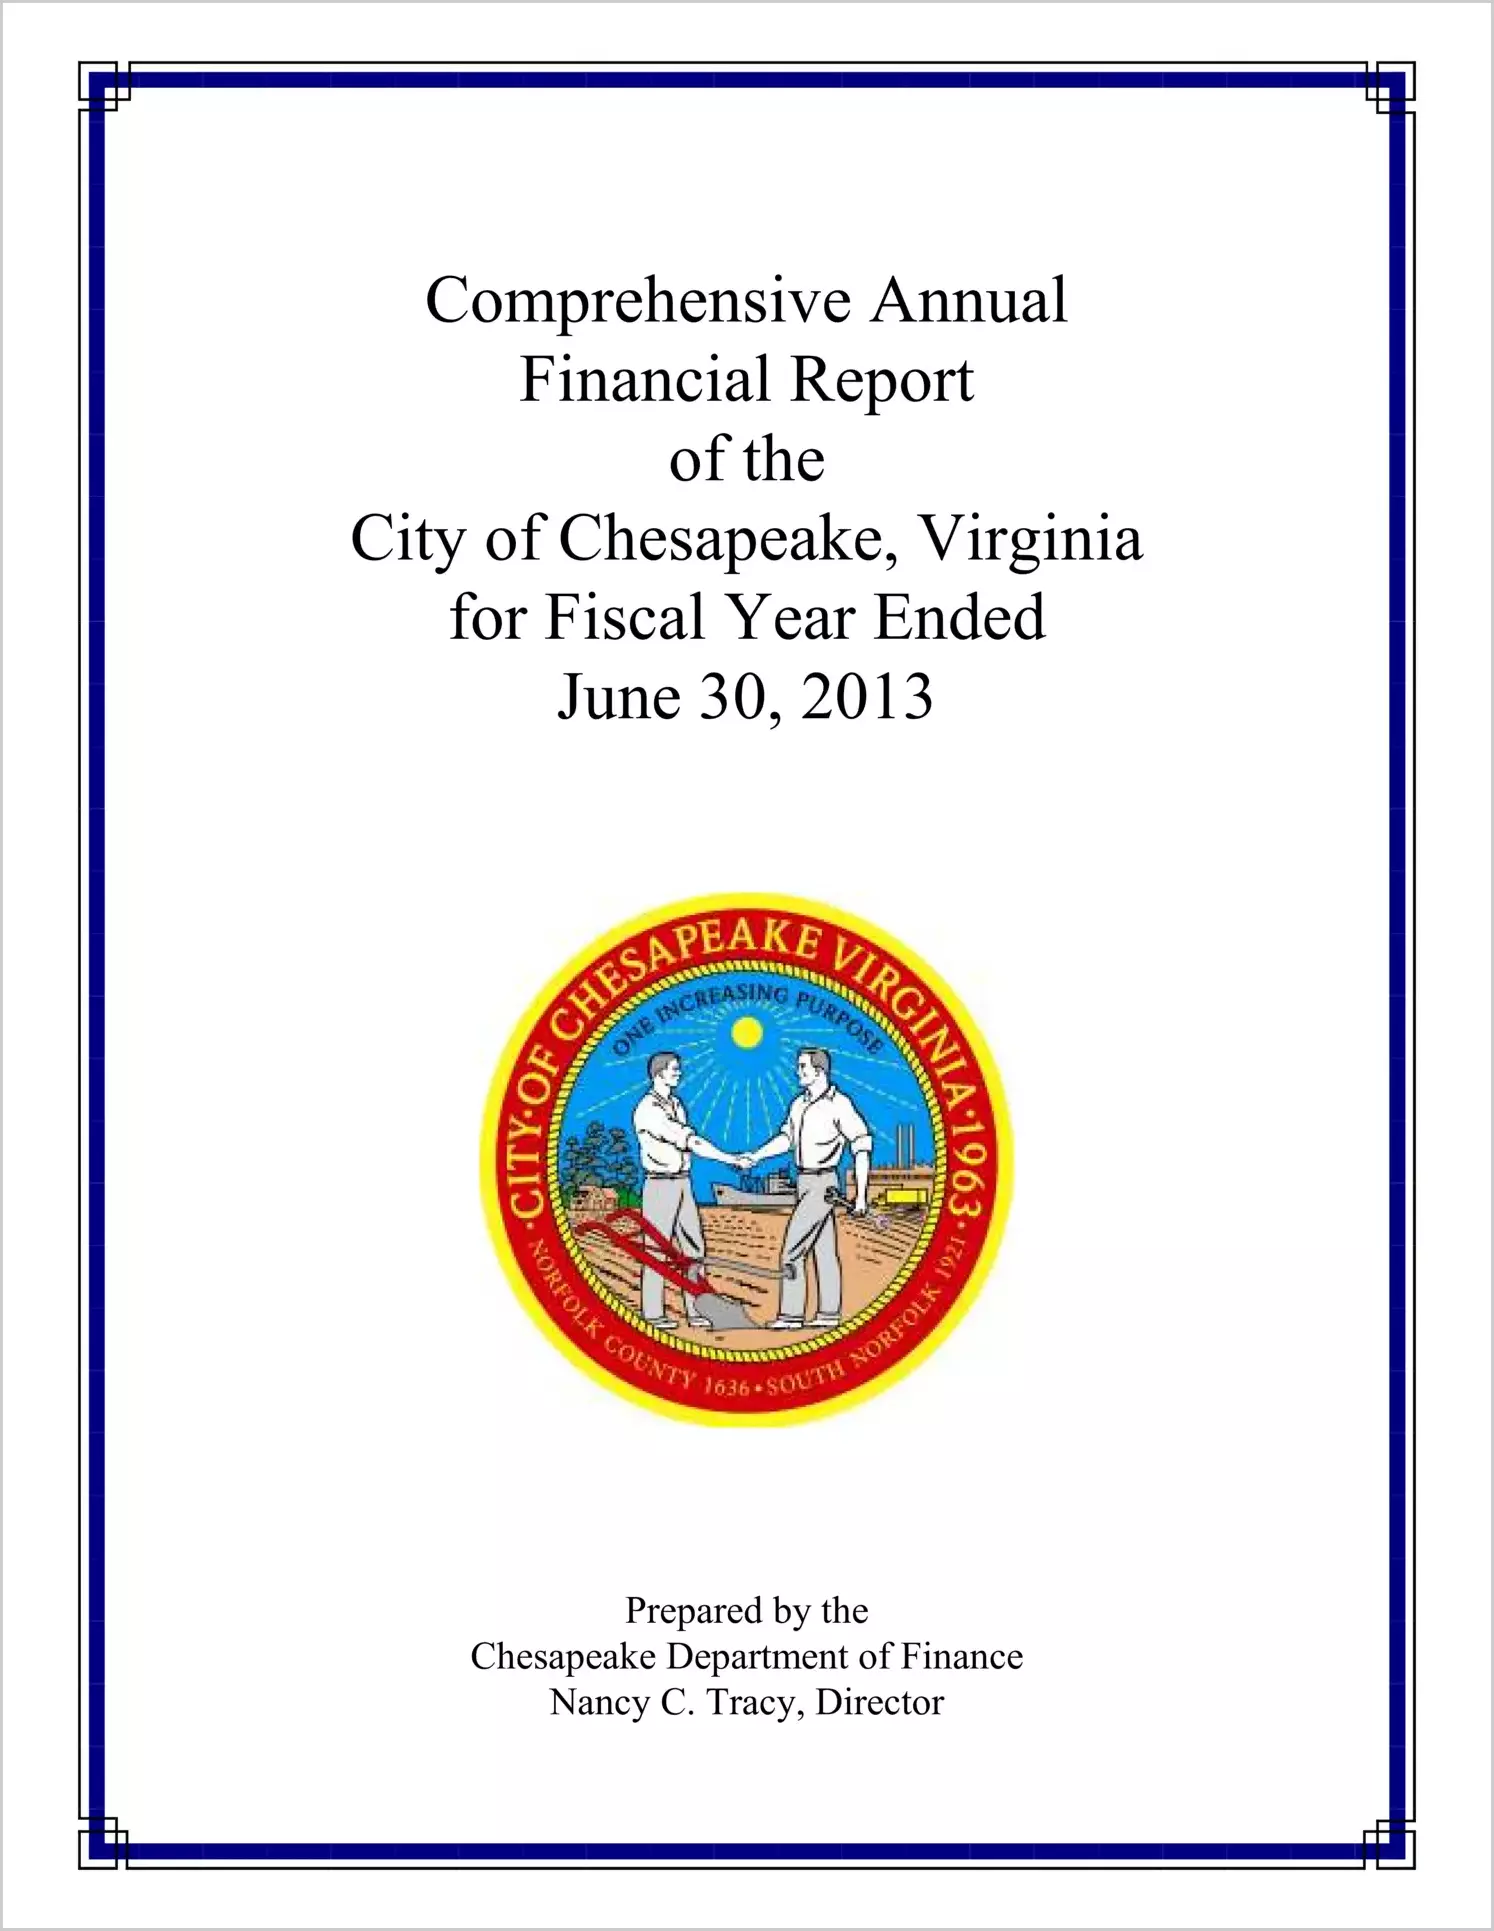 2013 Annual Financial Report for City of Chesapeake